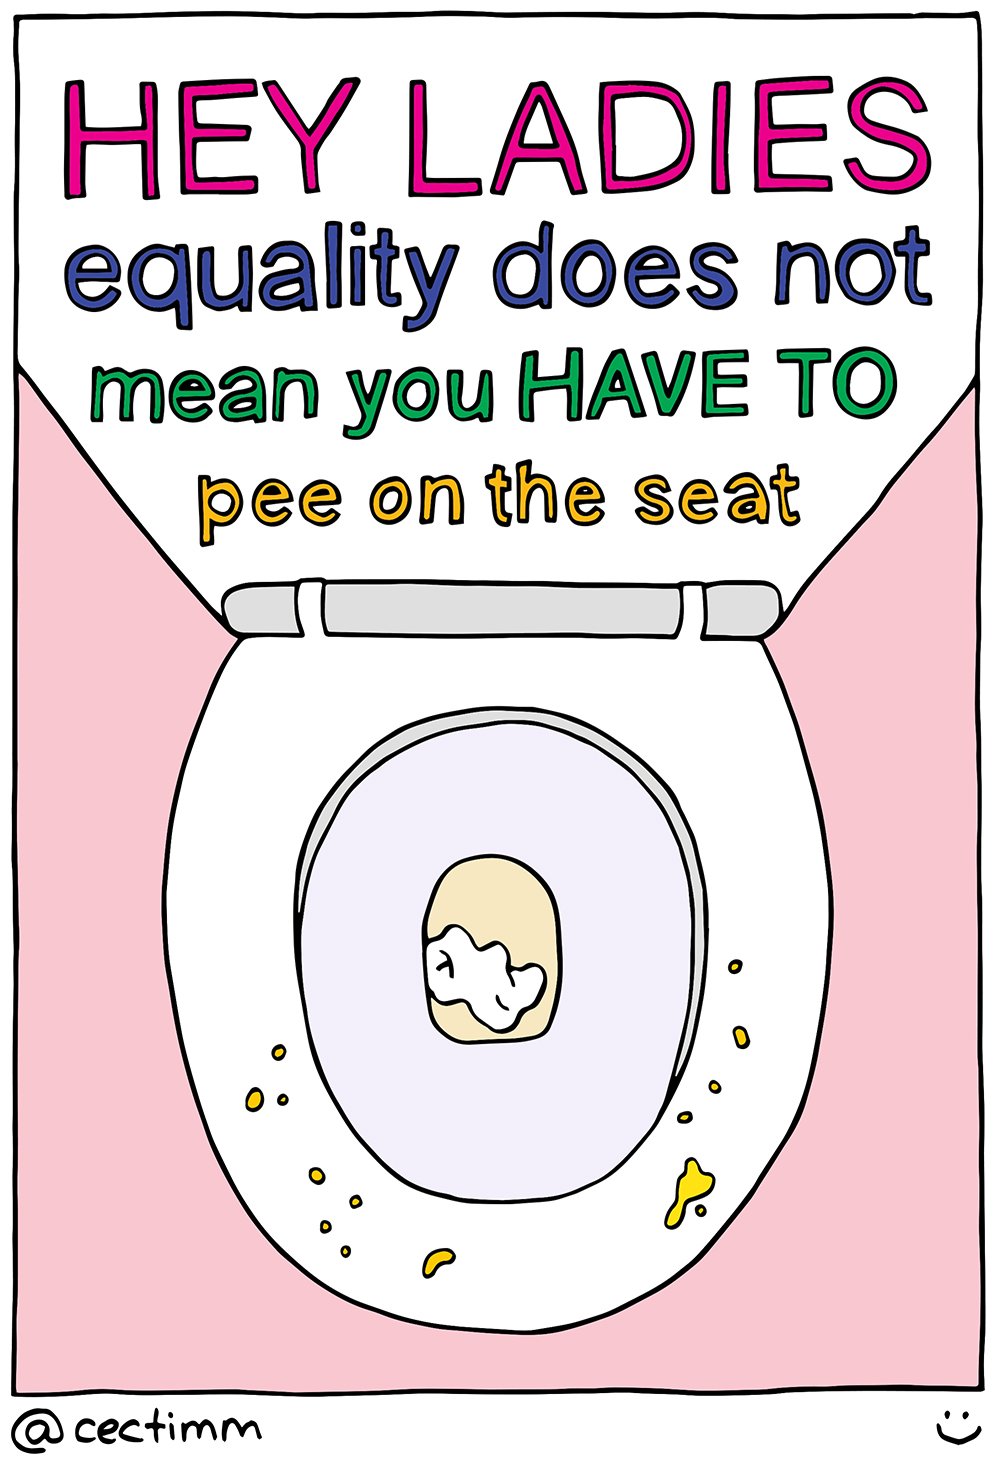 HEY LADIES equality does not mean you HAVE TO pee on the seat